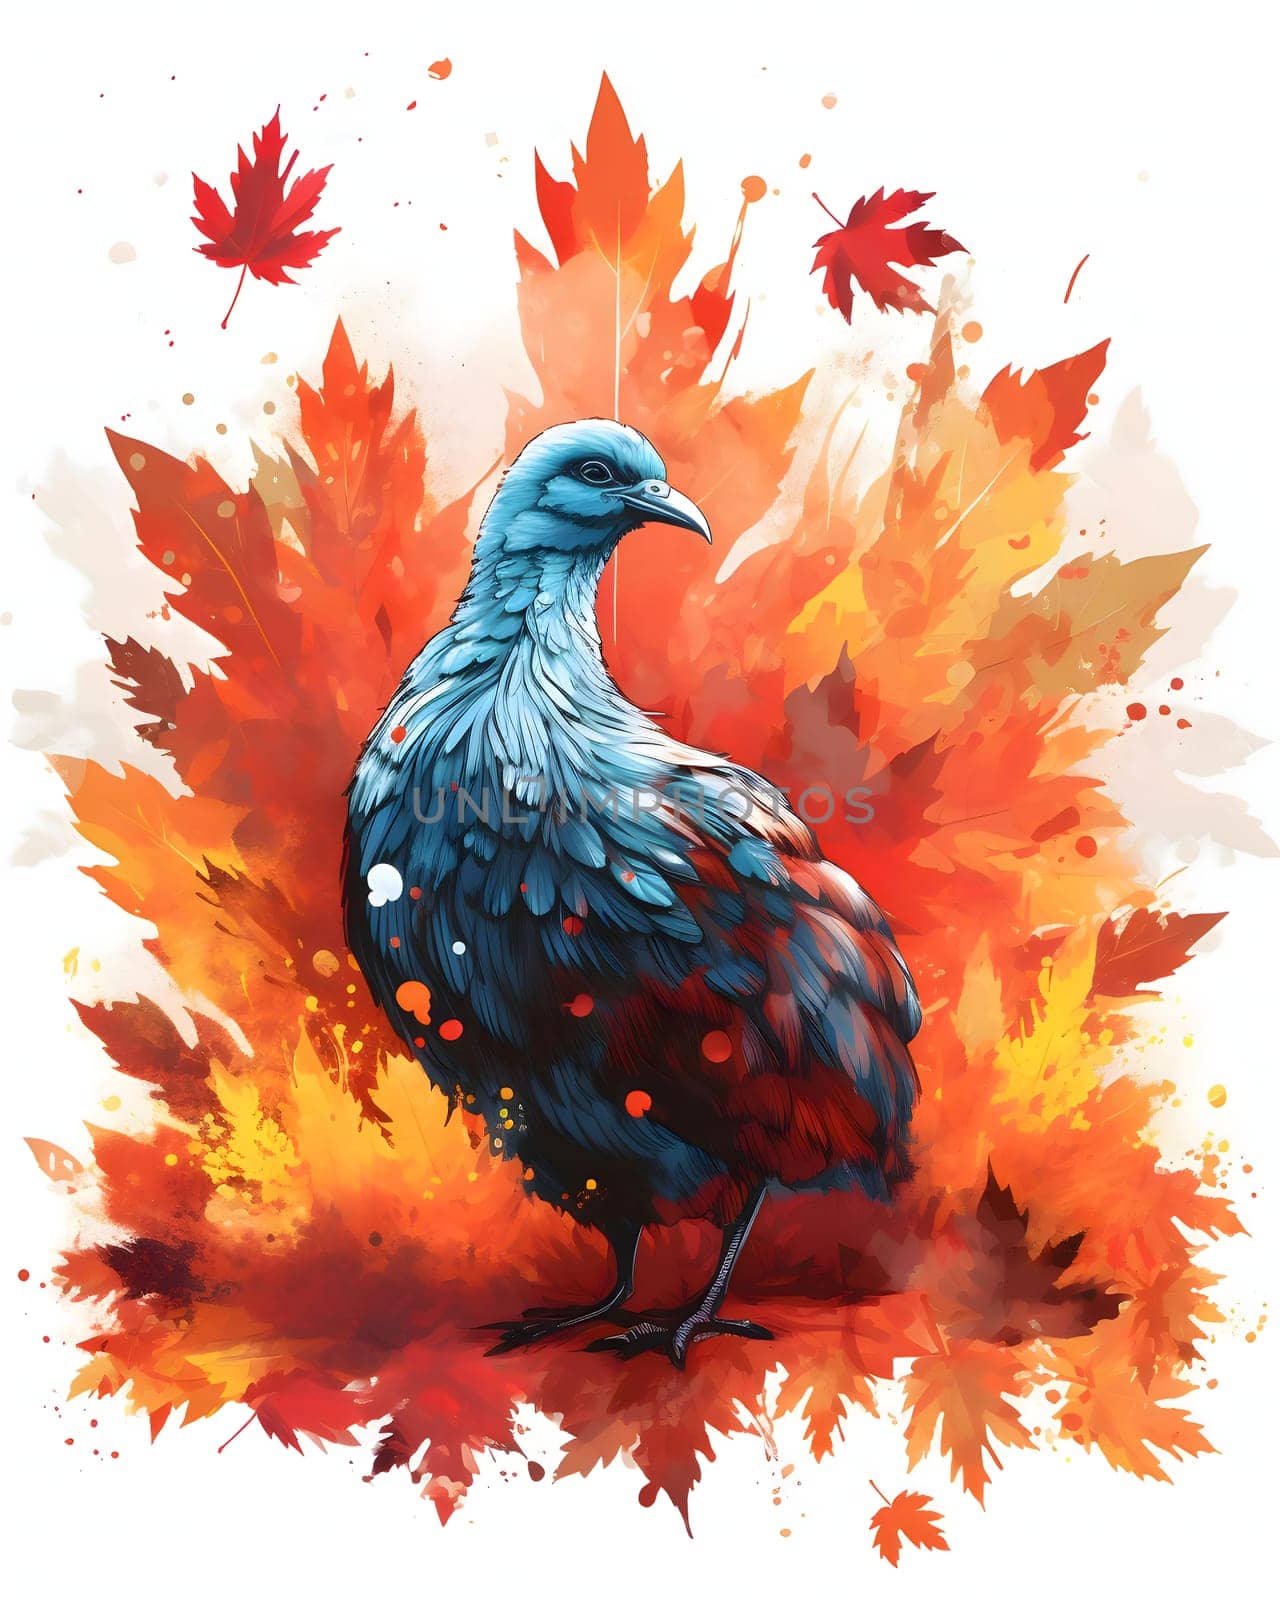 Illustration showing a young turkey over a ble autumn leaves white background. Turkey as the main dish of thanksgiving for the harvest. An atmosphere of joy and celebration.